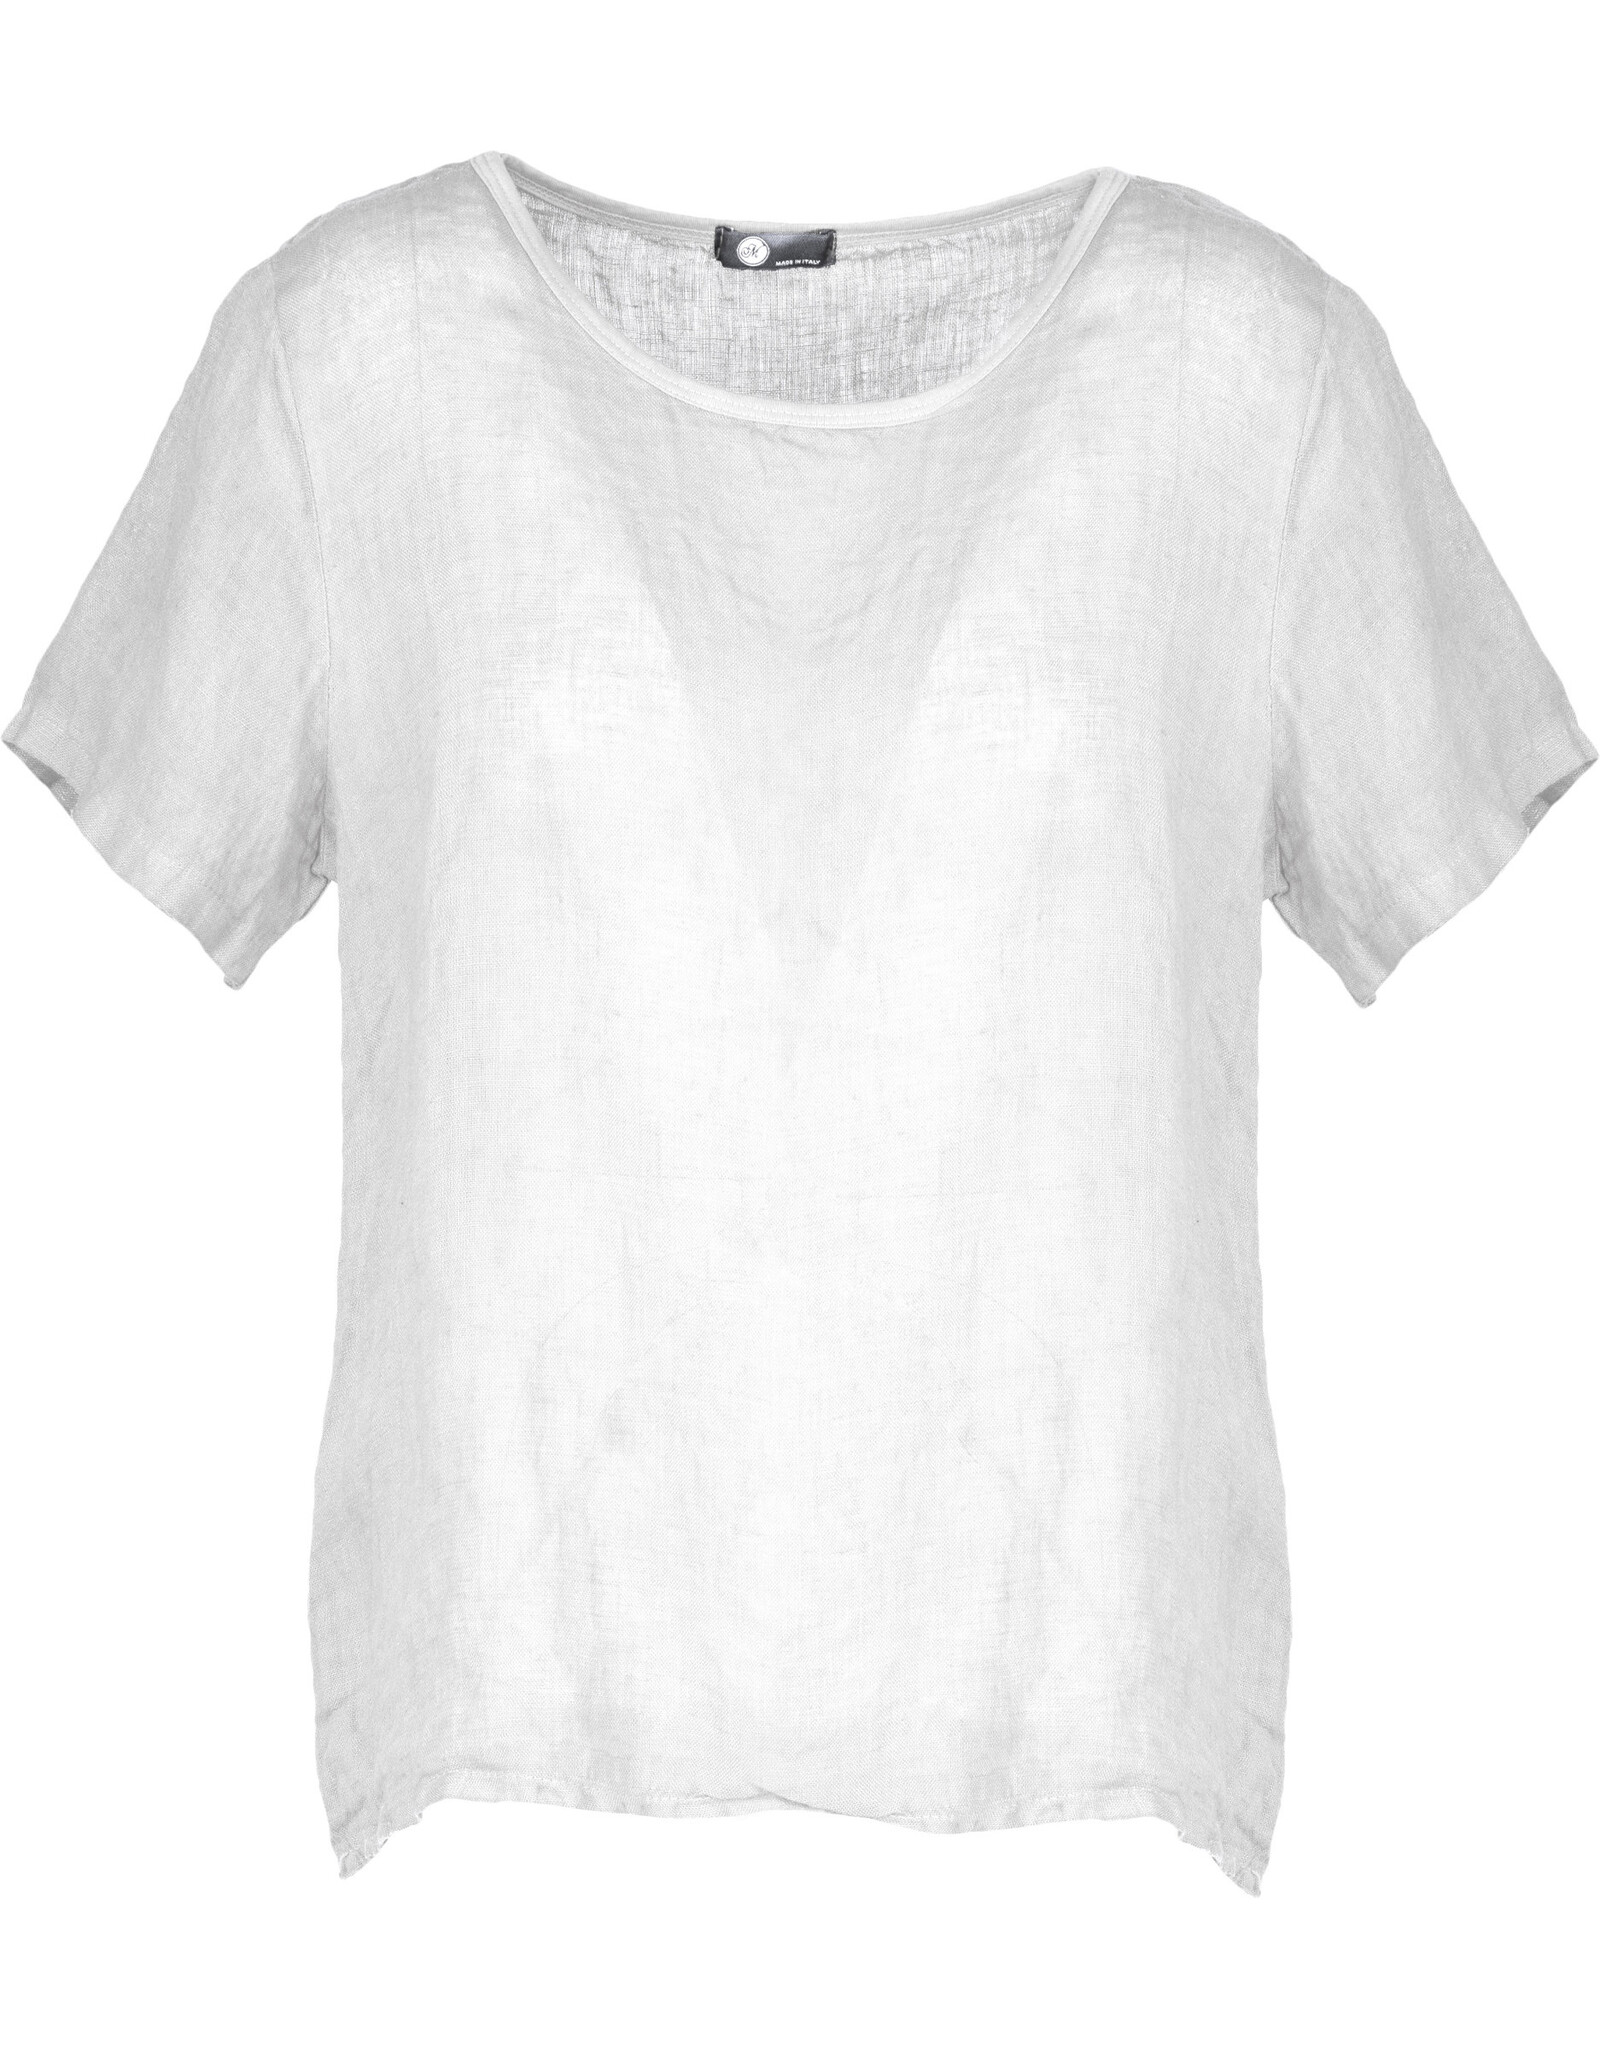 Made in Italy - Short sleeve top (White)